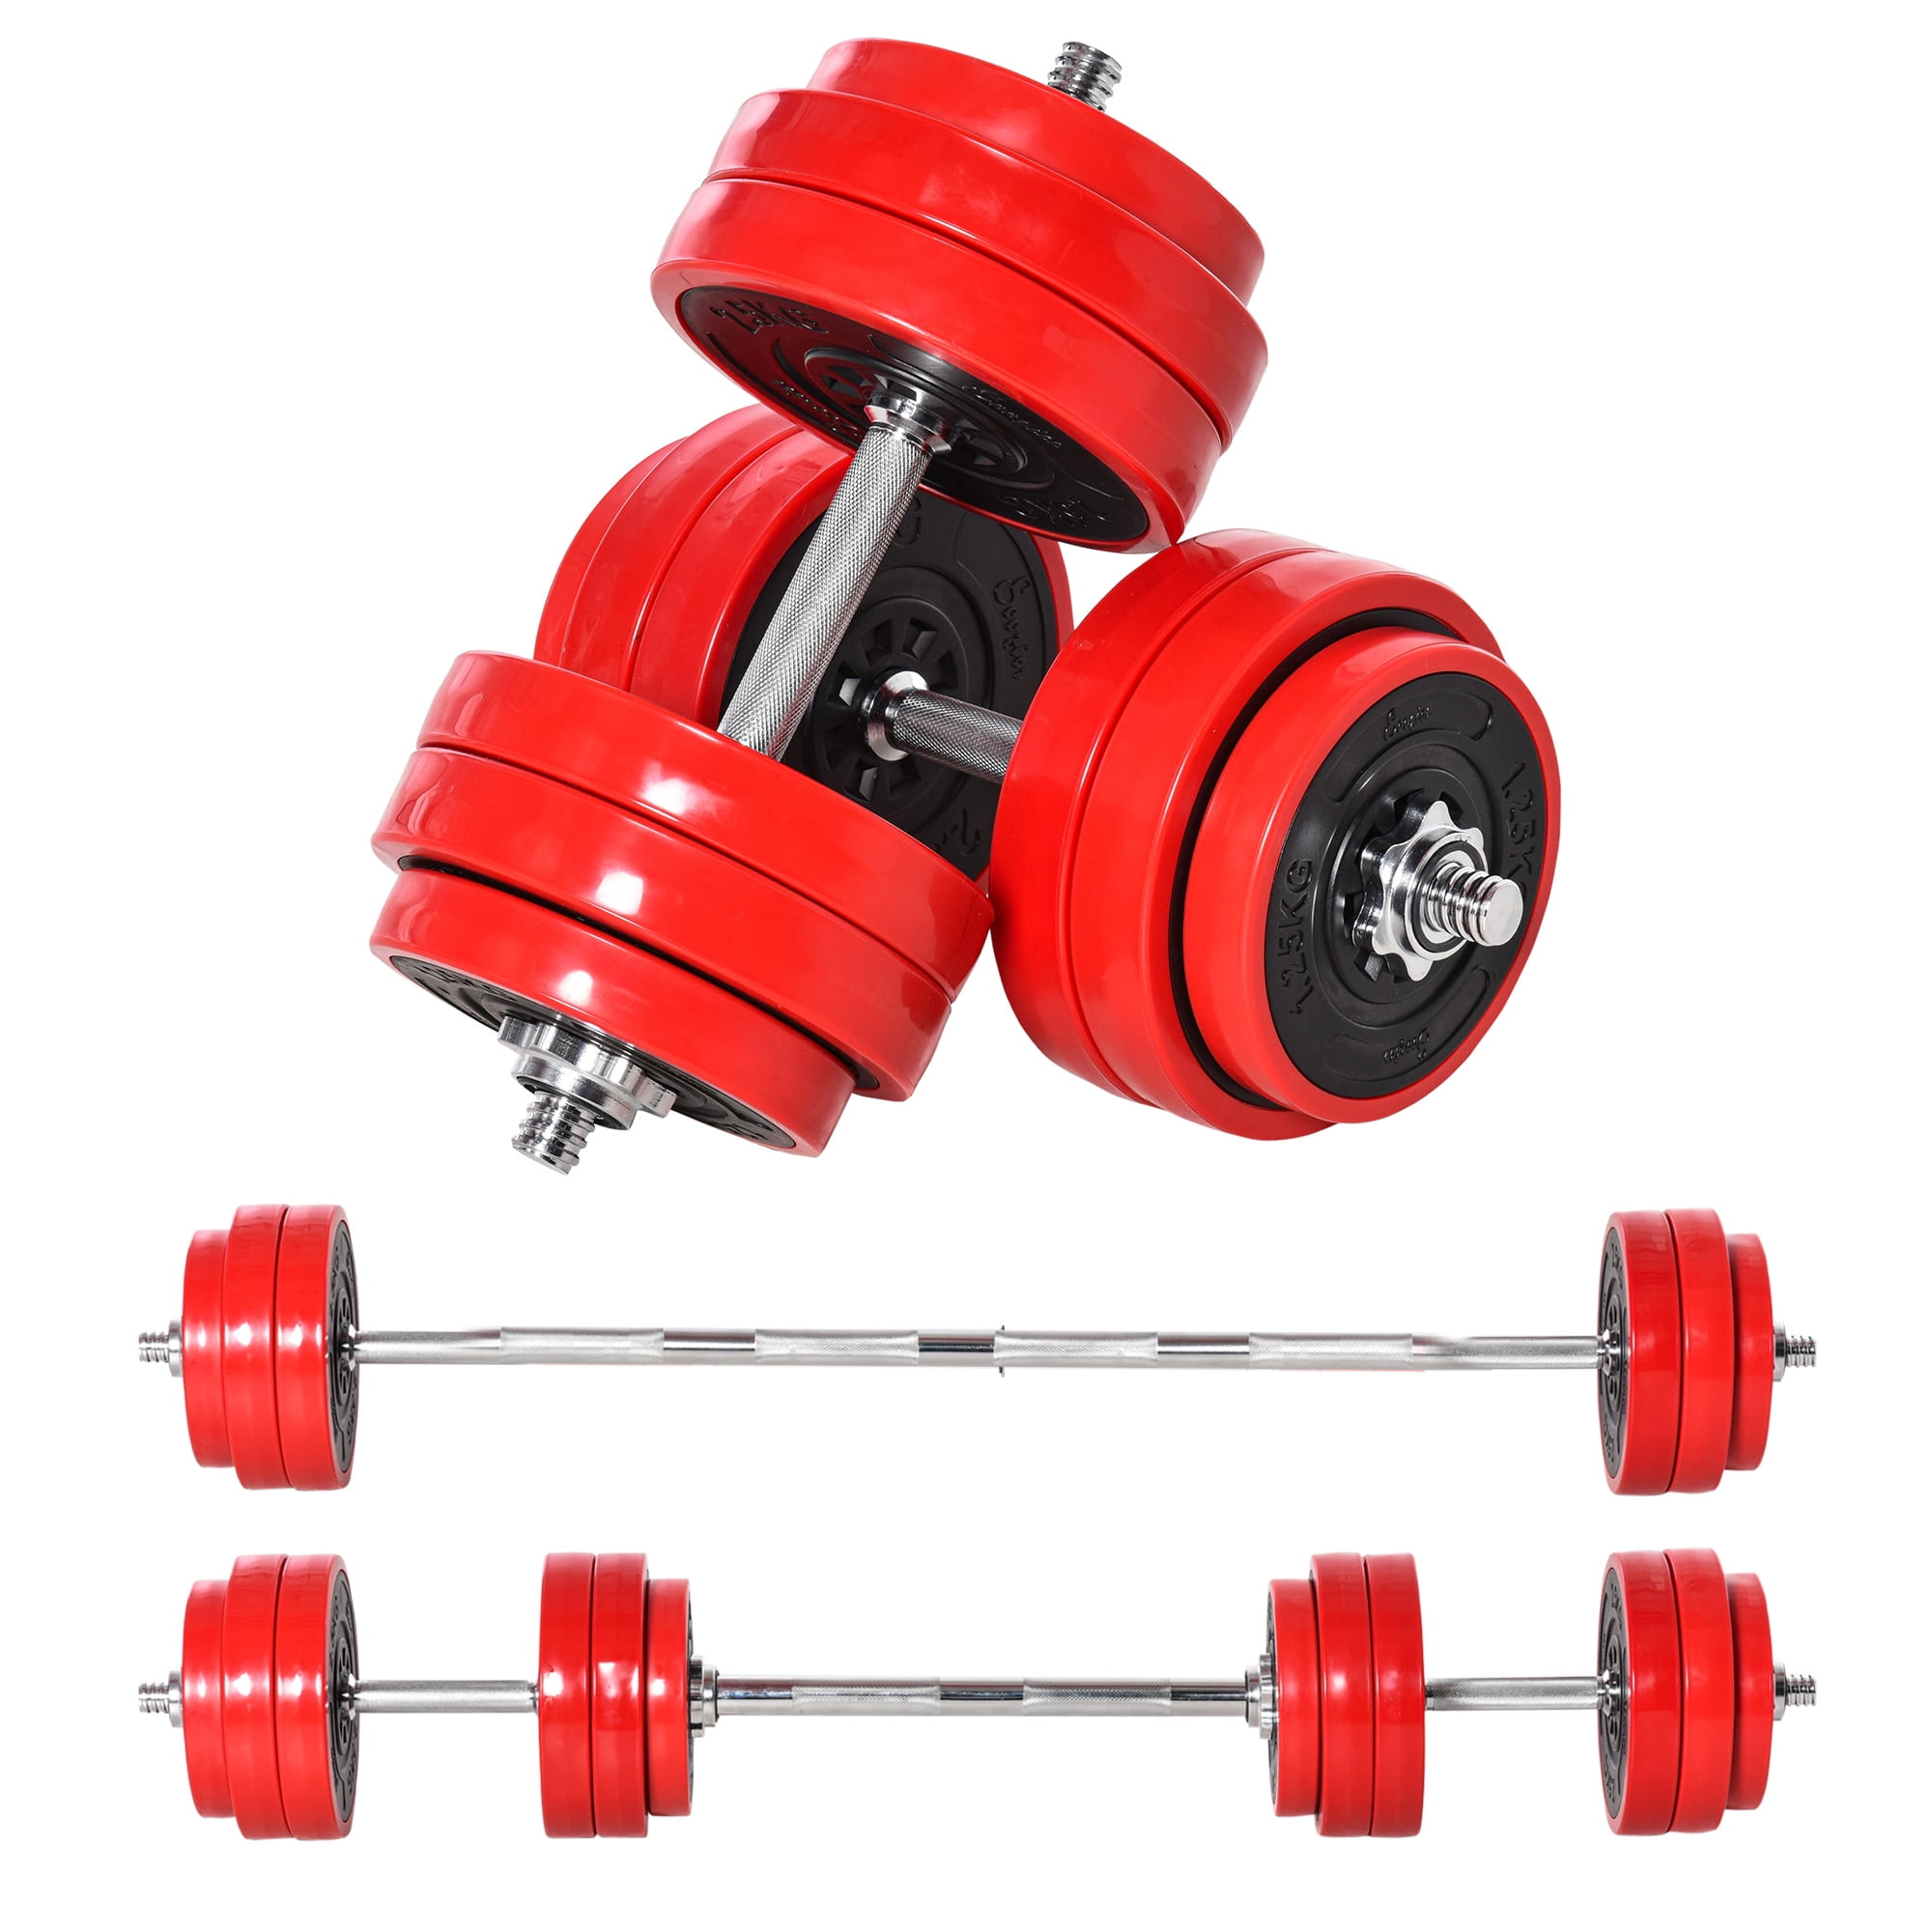 Weider Ankle Weights for sale online 